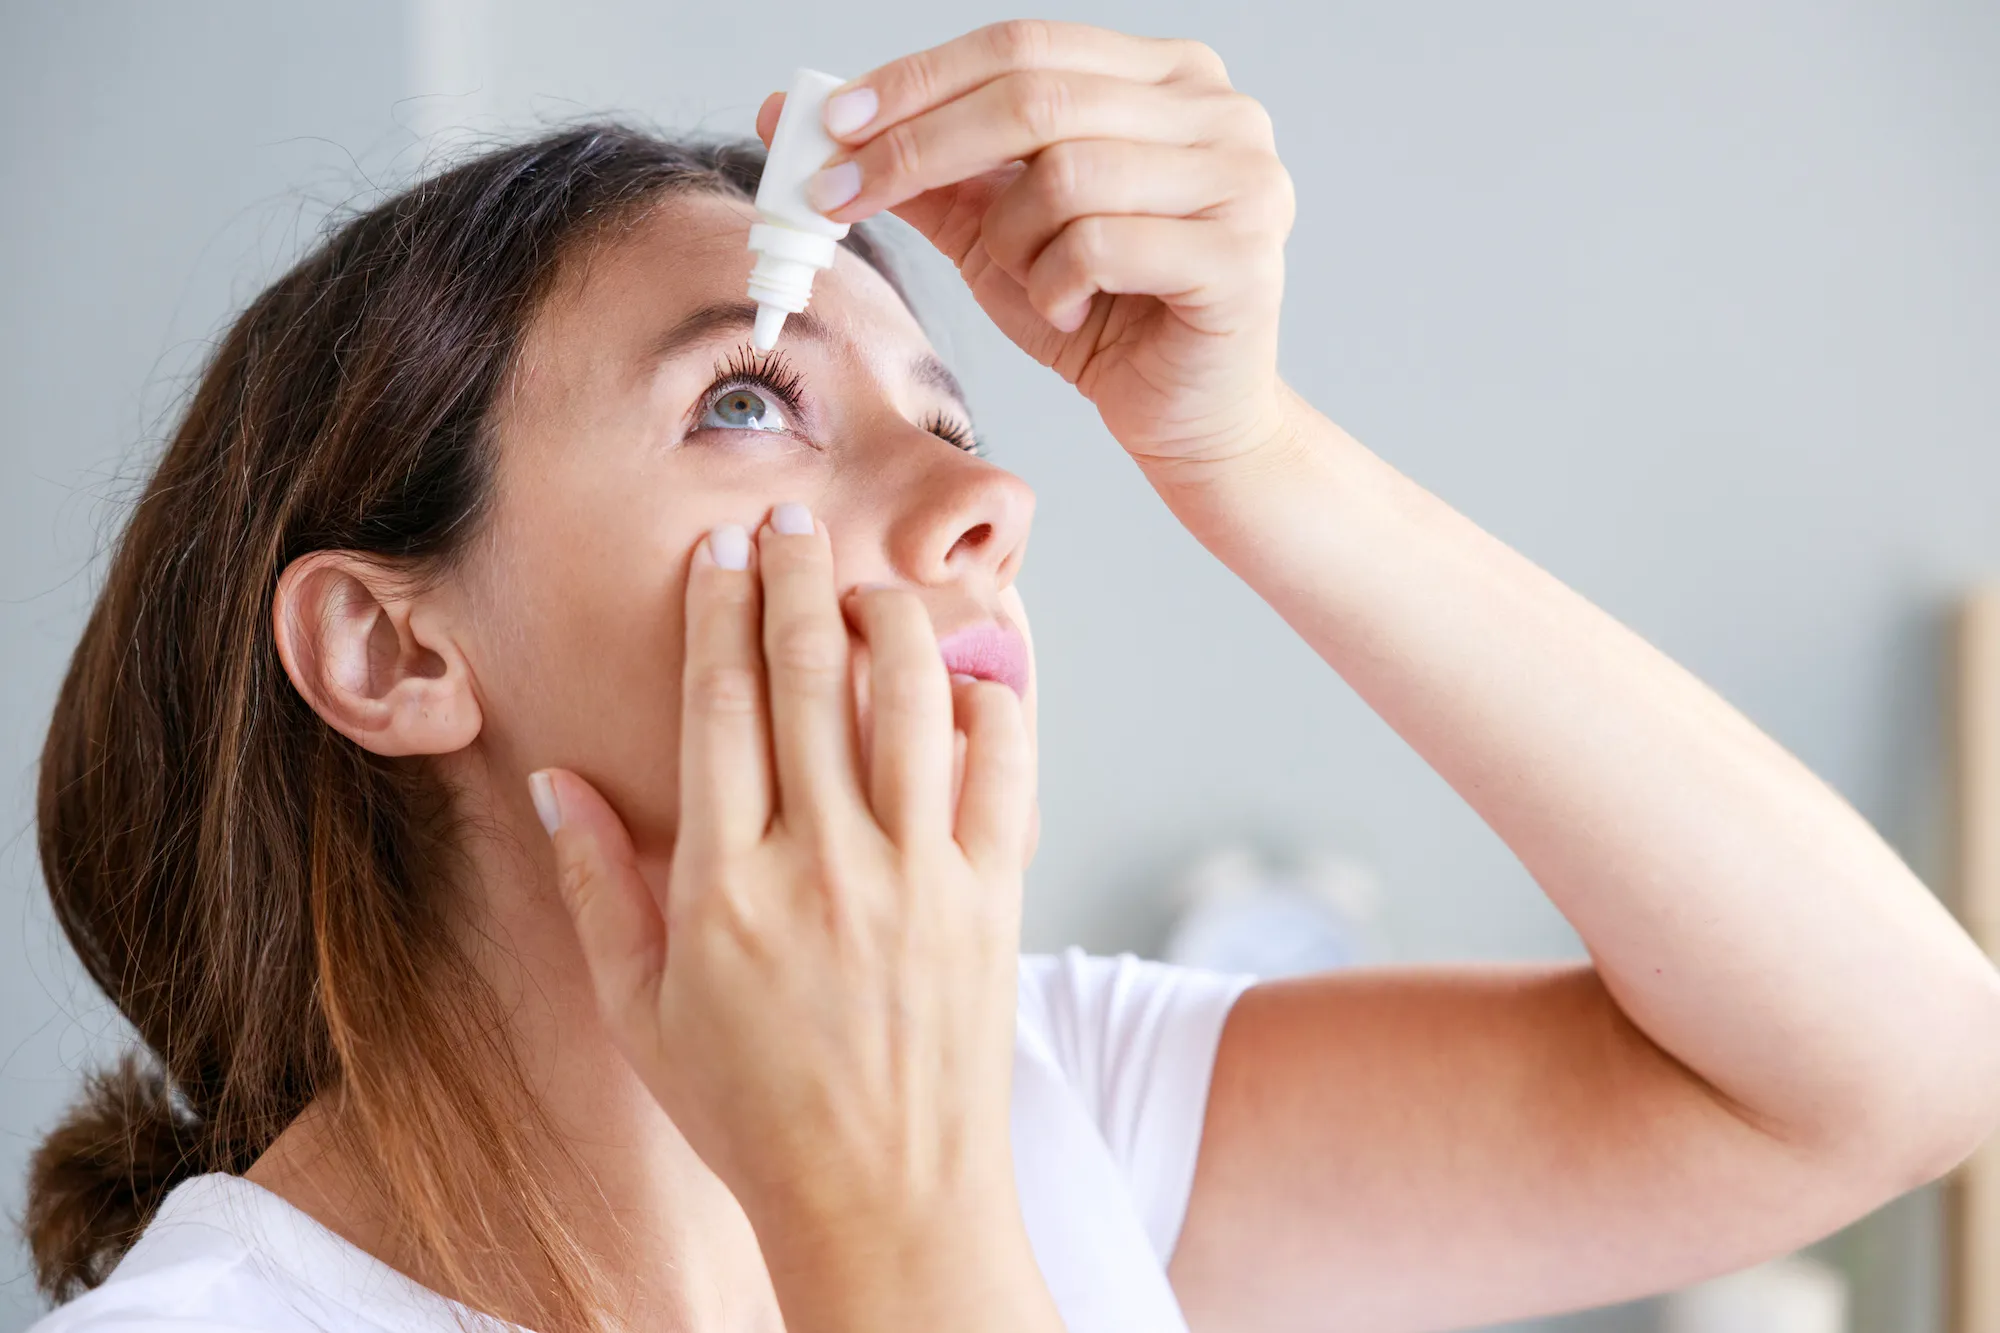 FDA warns against buying, using eyedrops made in ‘insanitary conditions’